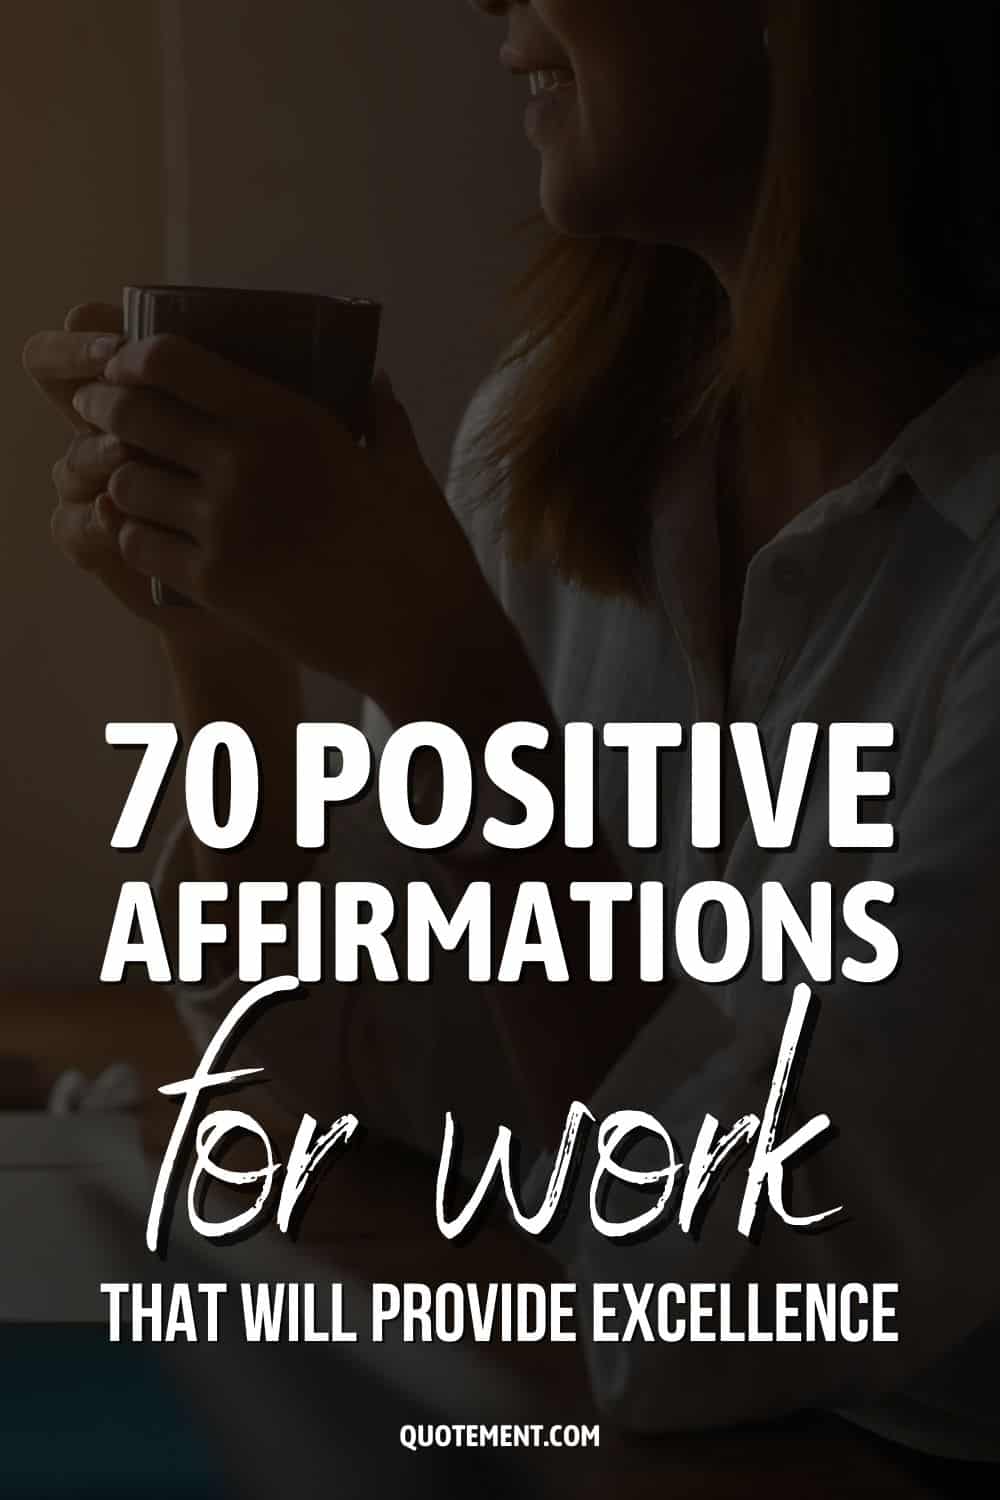 70 Positive Affirmations For Work That Will Provide Excellence